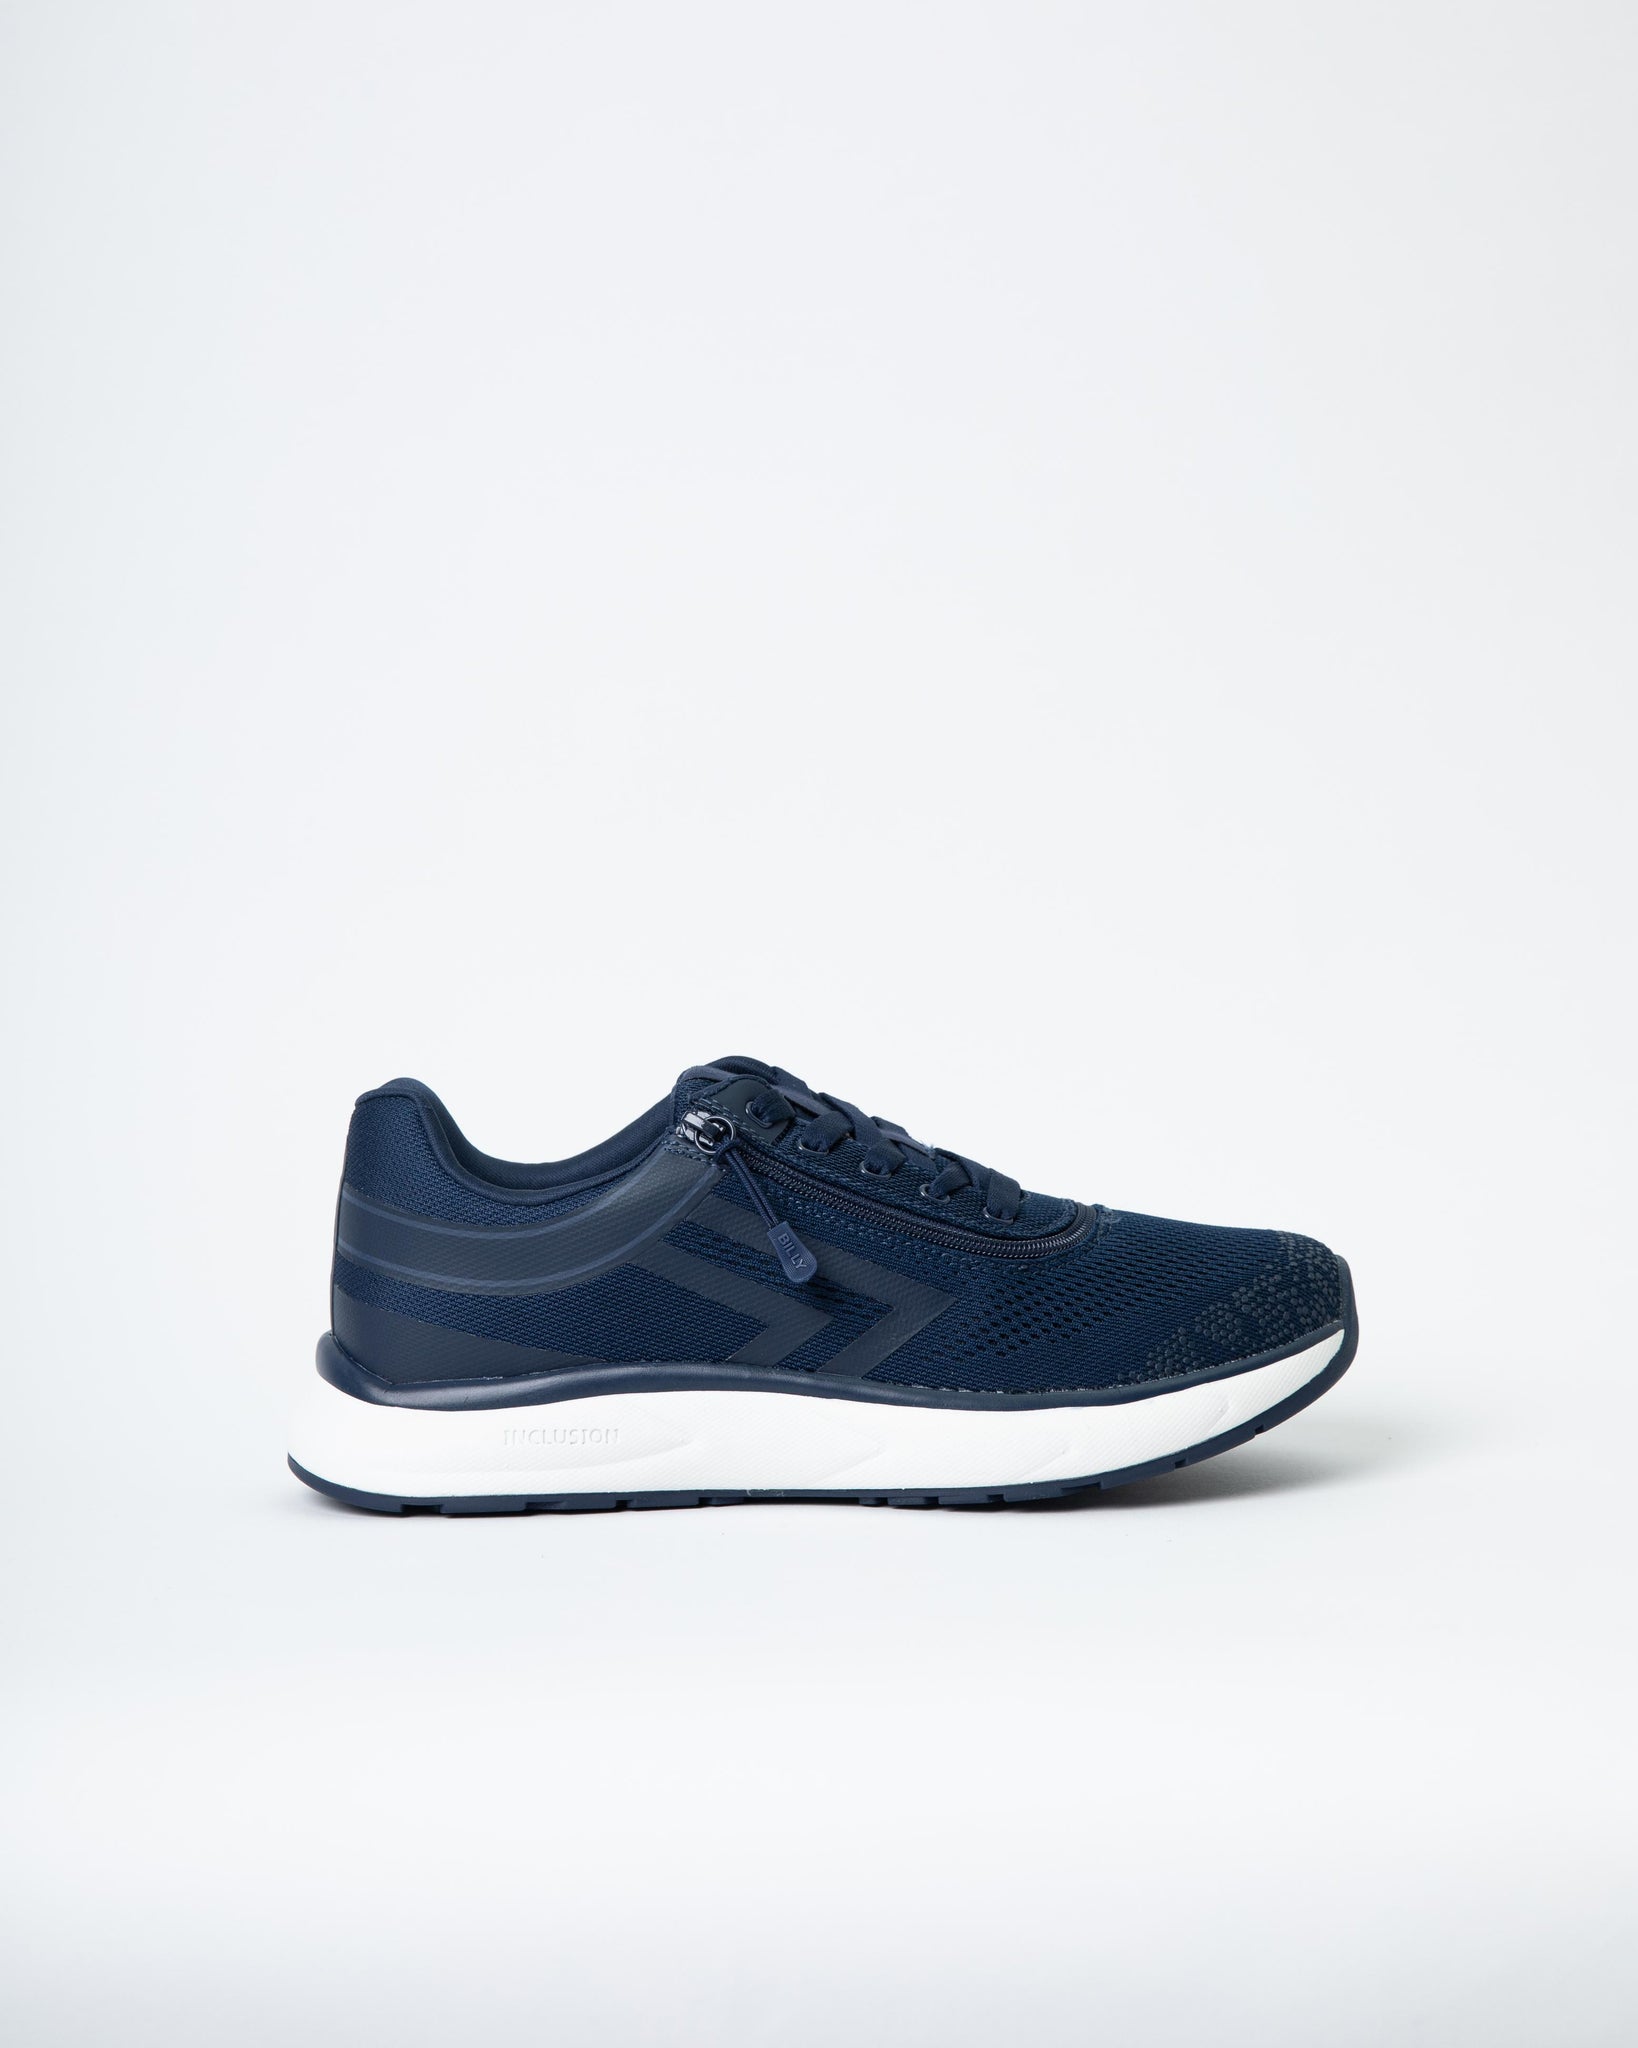 Inclusion Too (Mens) - Navy